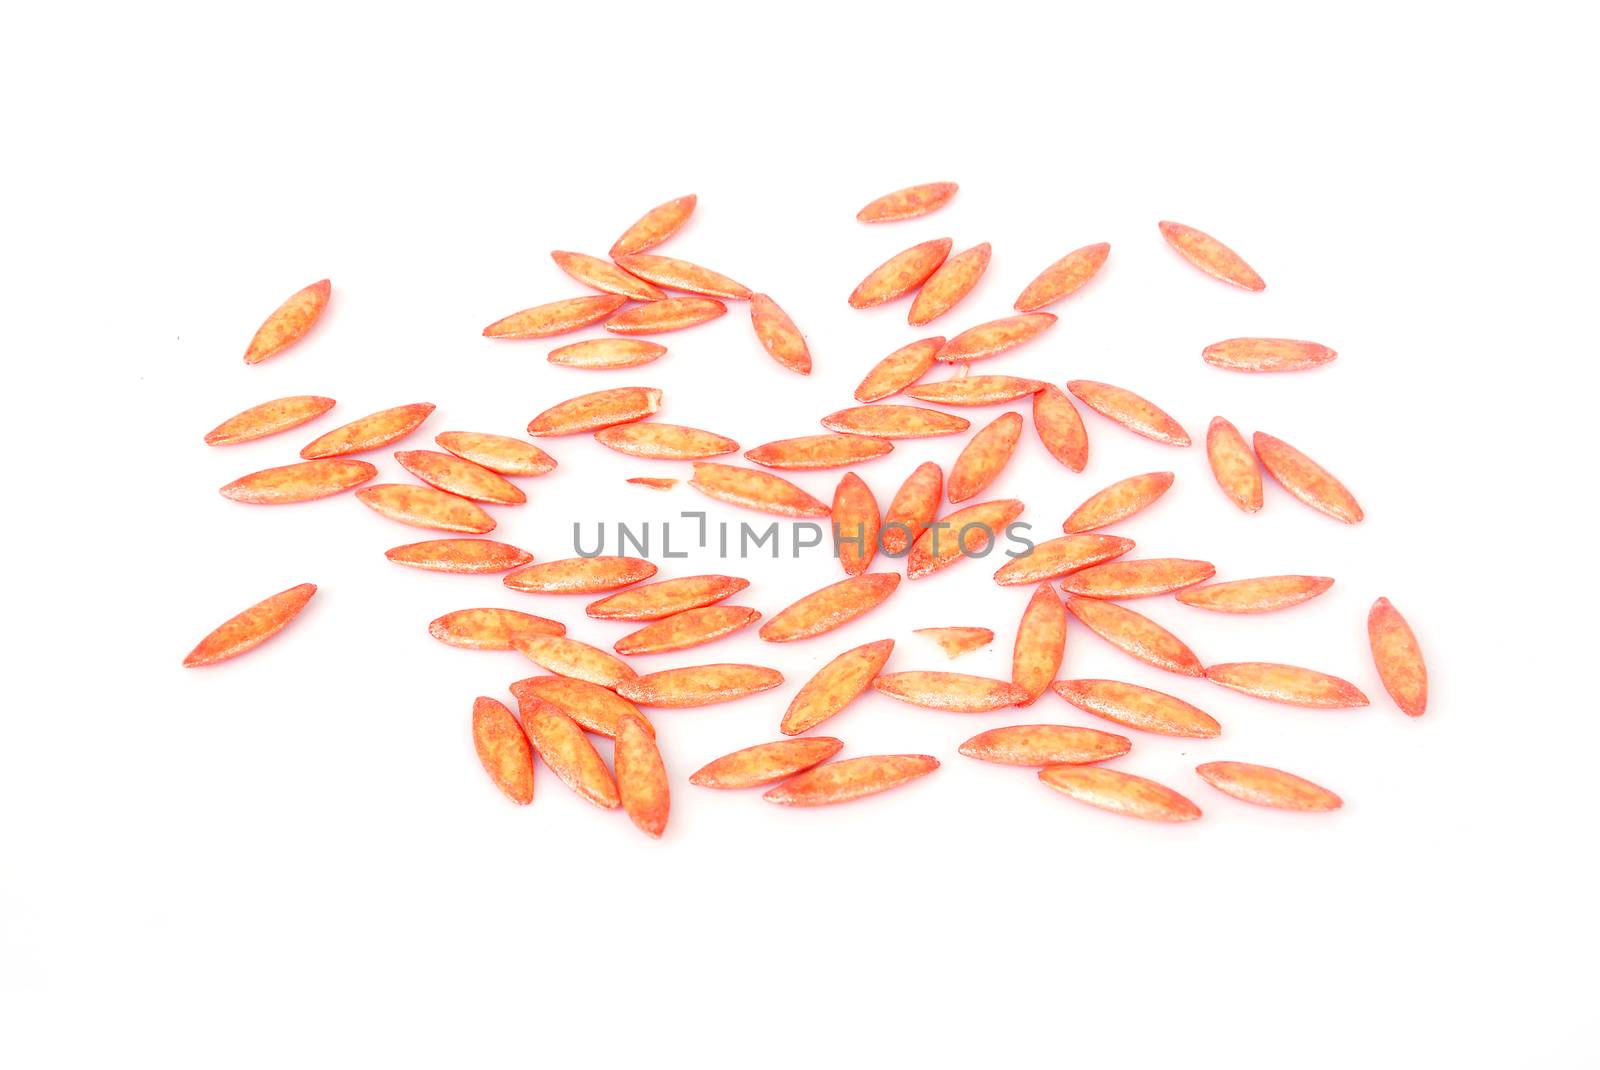 Cucumber seeds coating accelerate on white background.